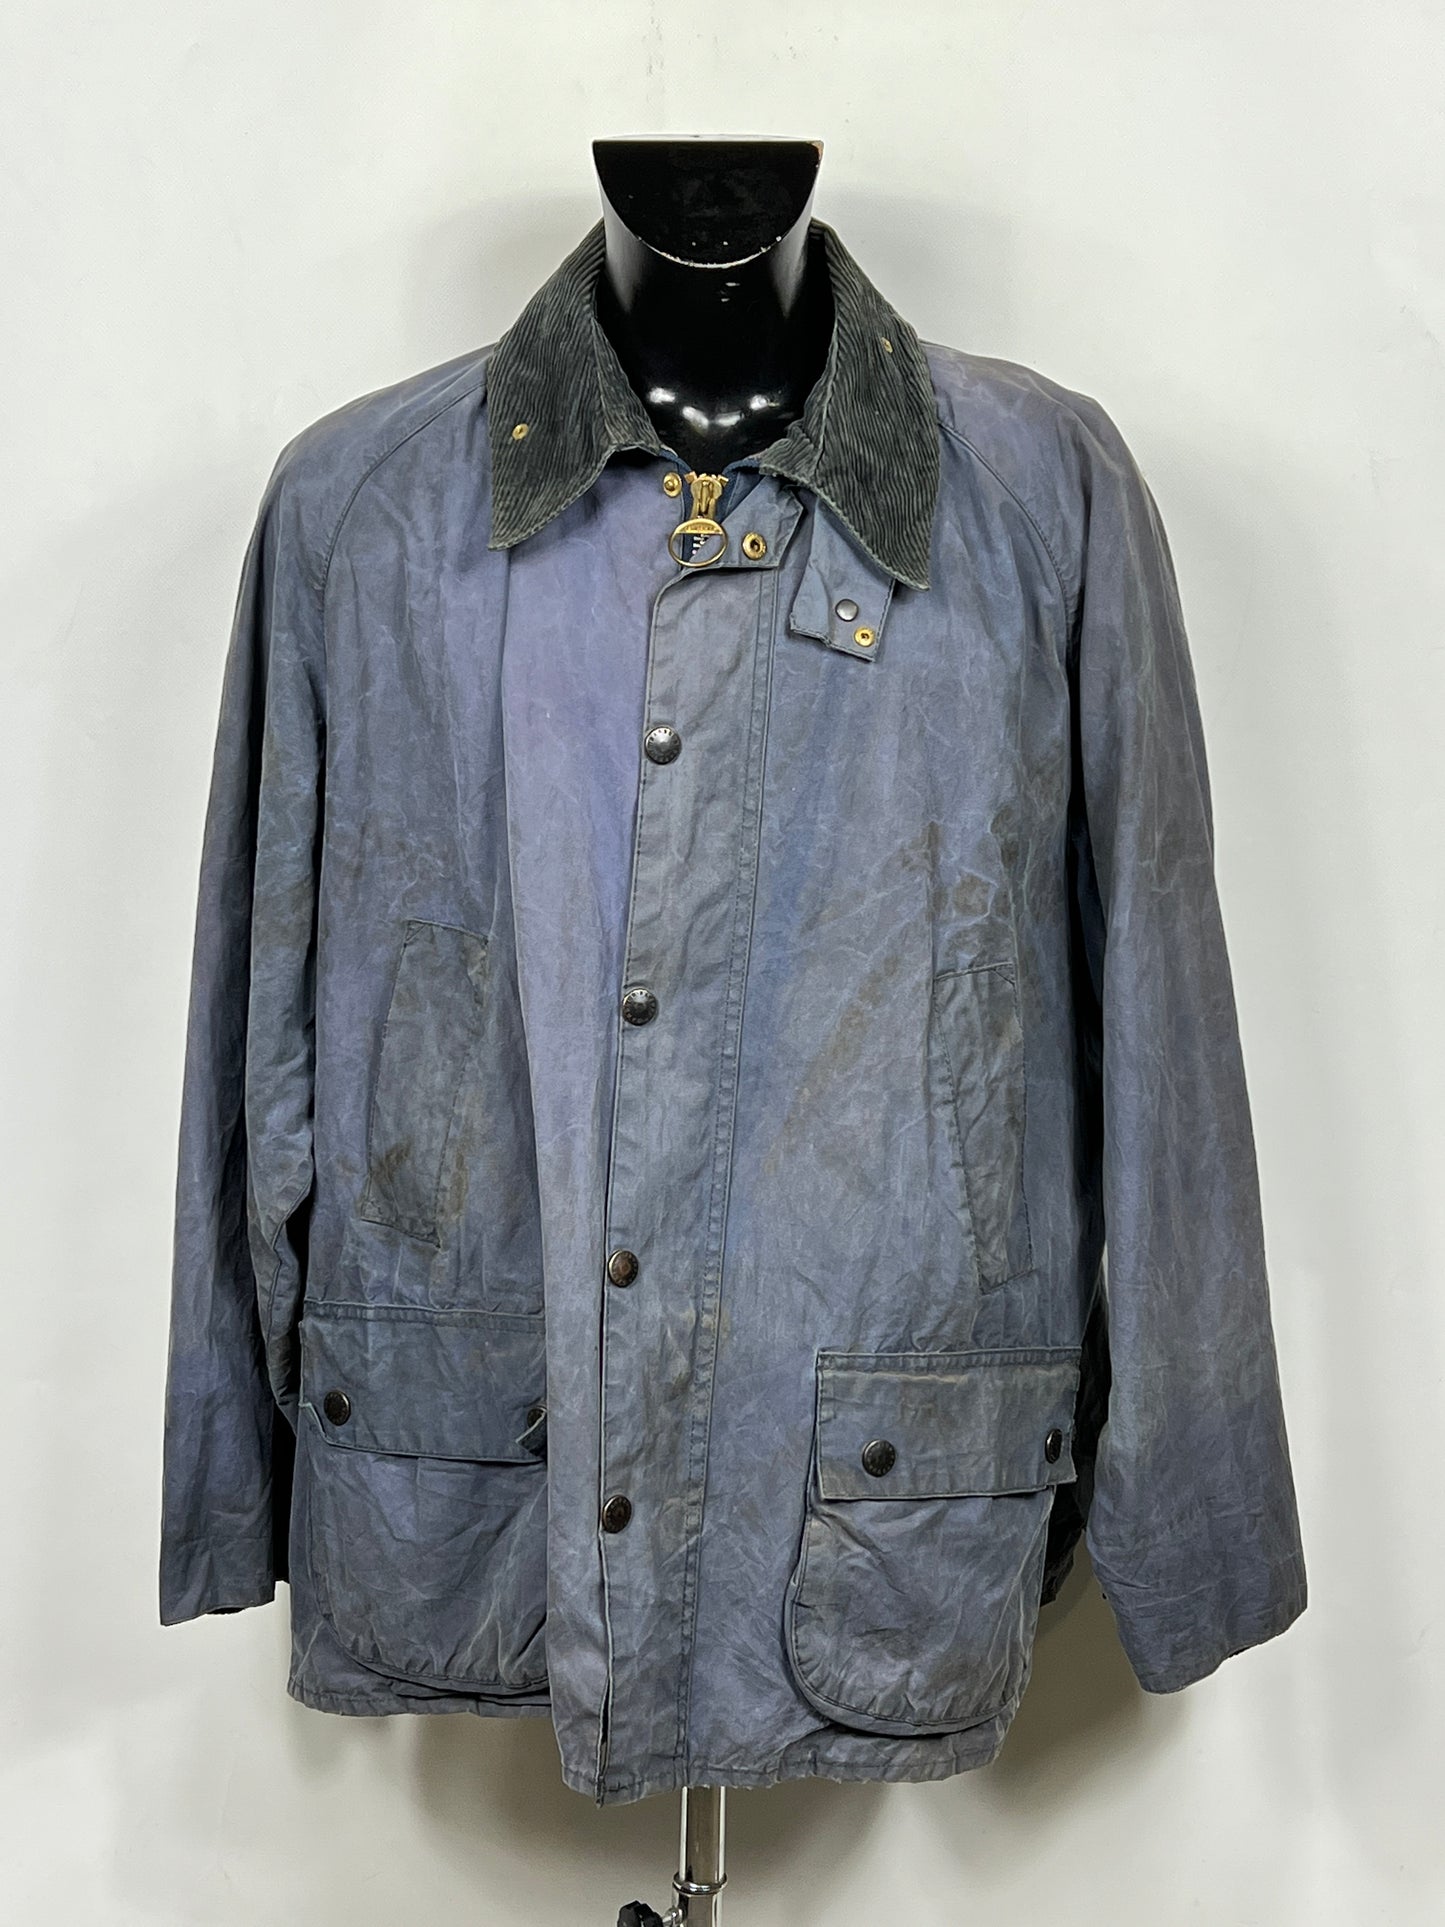 Barbour Giacca Bedale blu chiaro Vintage C50/127 CM XXL Navy Waxed Bedale Jacket